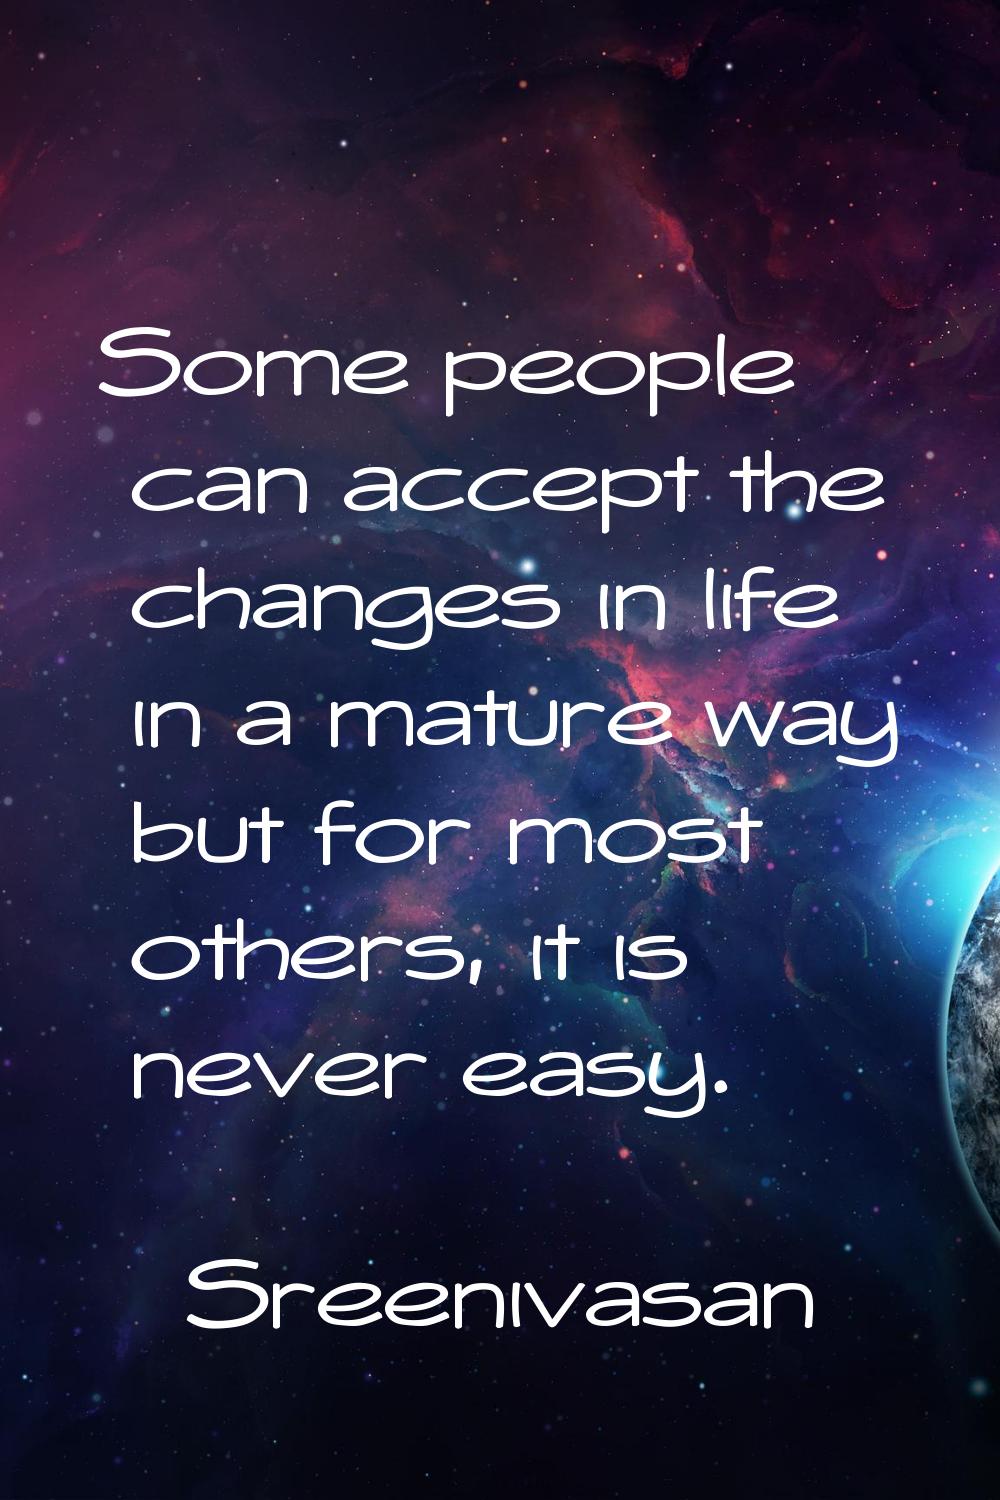 Some people can accept the changes in life in a mature way but for most others, it is never easy.